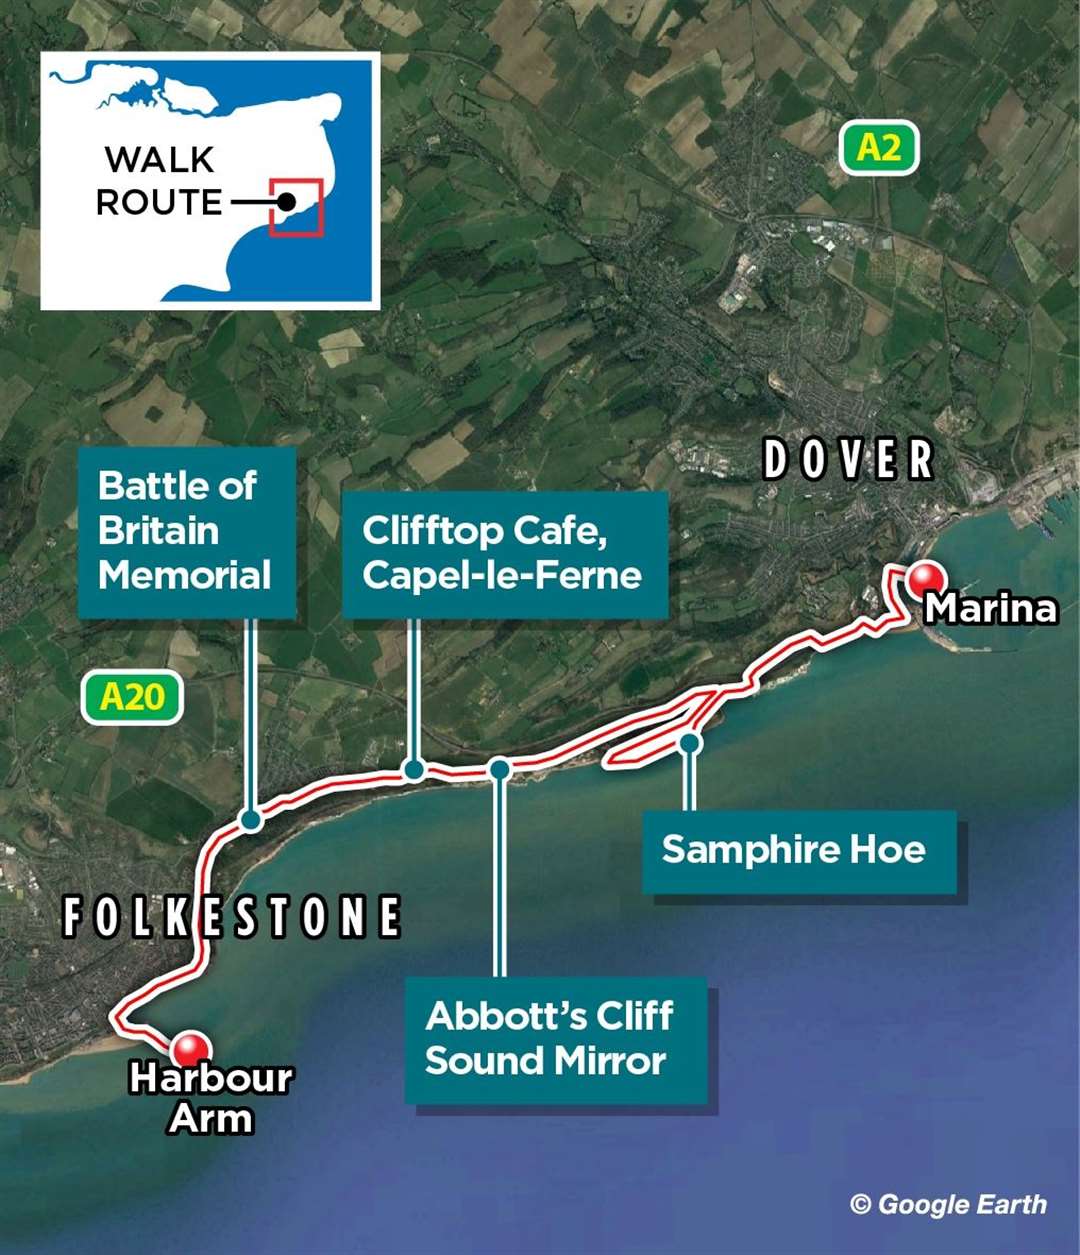 The route our man took on his coastal walk